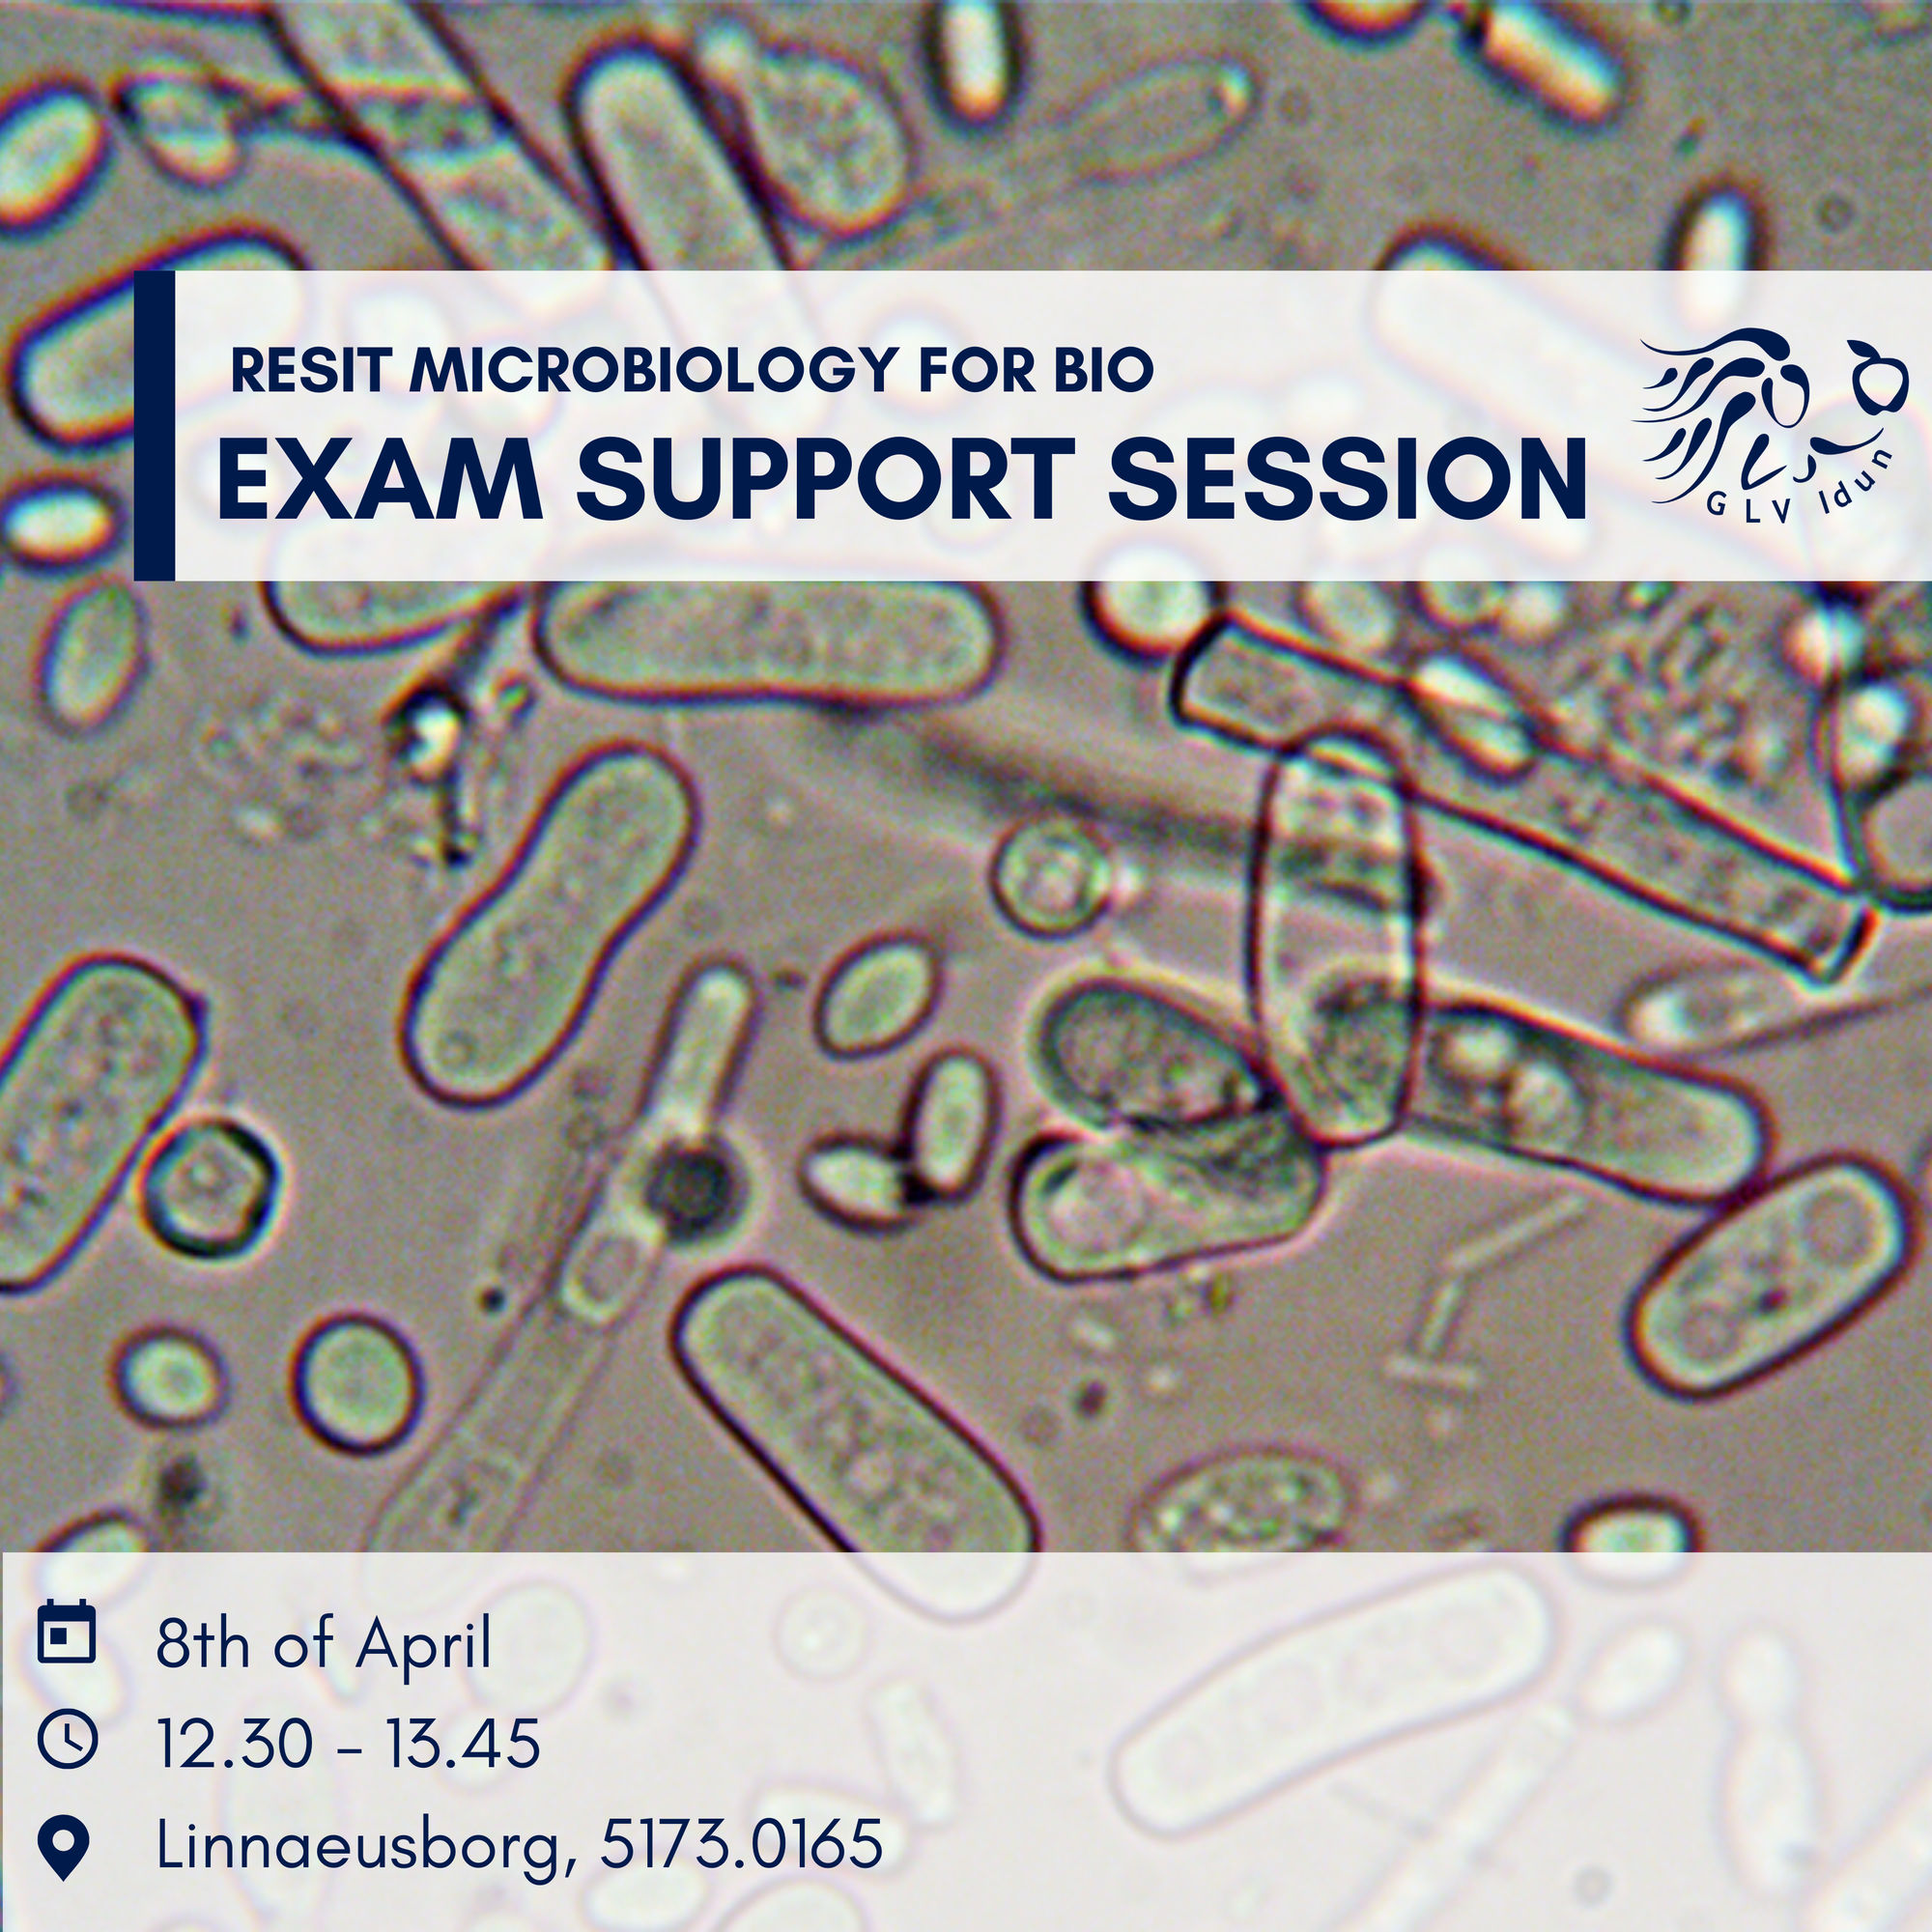 Exam Support Session: Resit Microbiology